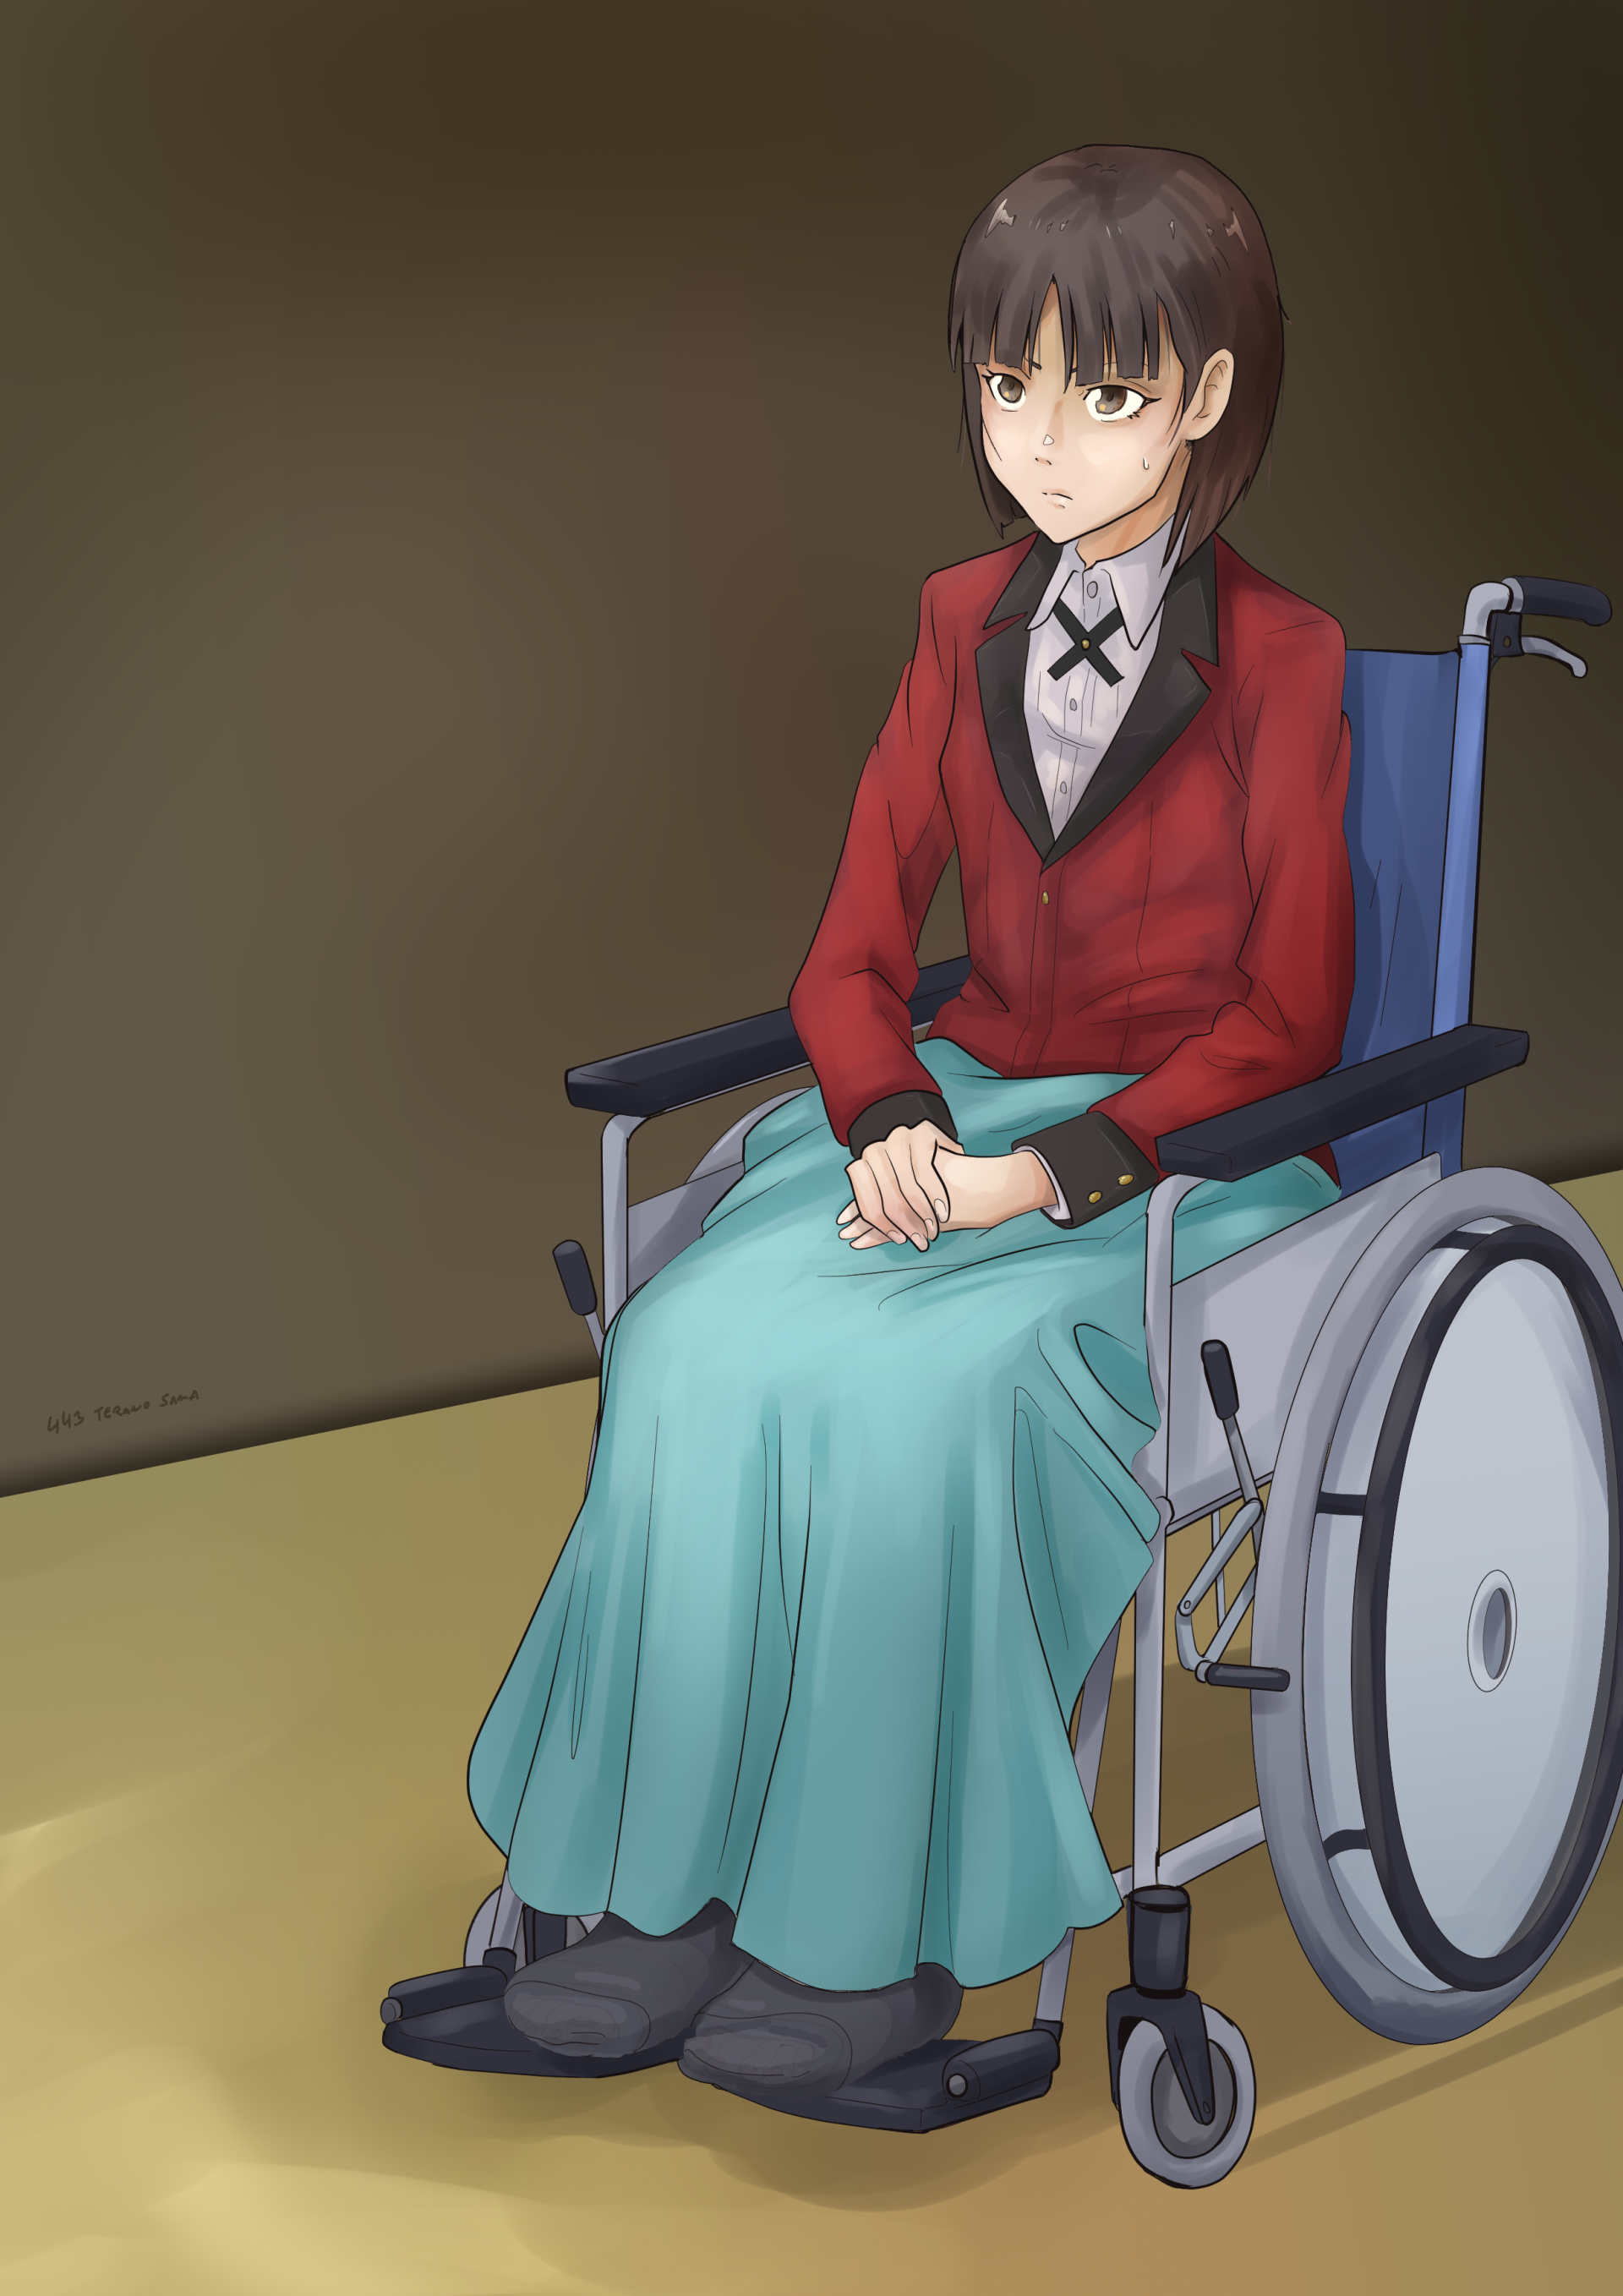 Smiling Anime Girl In Wheelchair by Disconnect3301 on DeviantArt